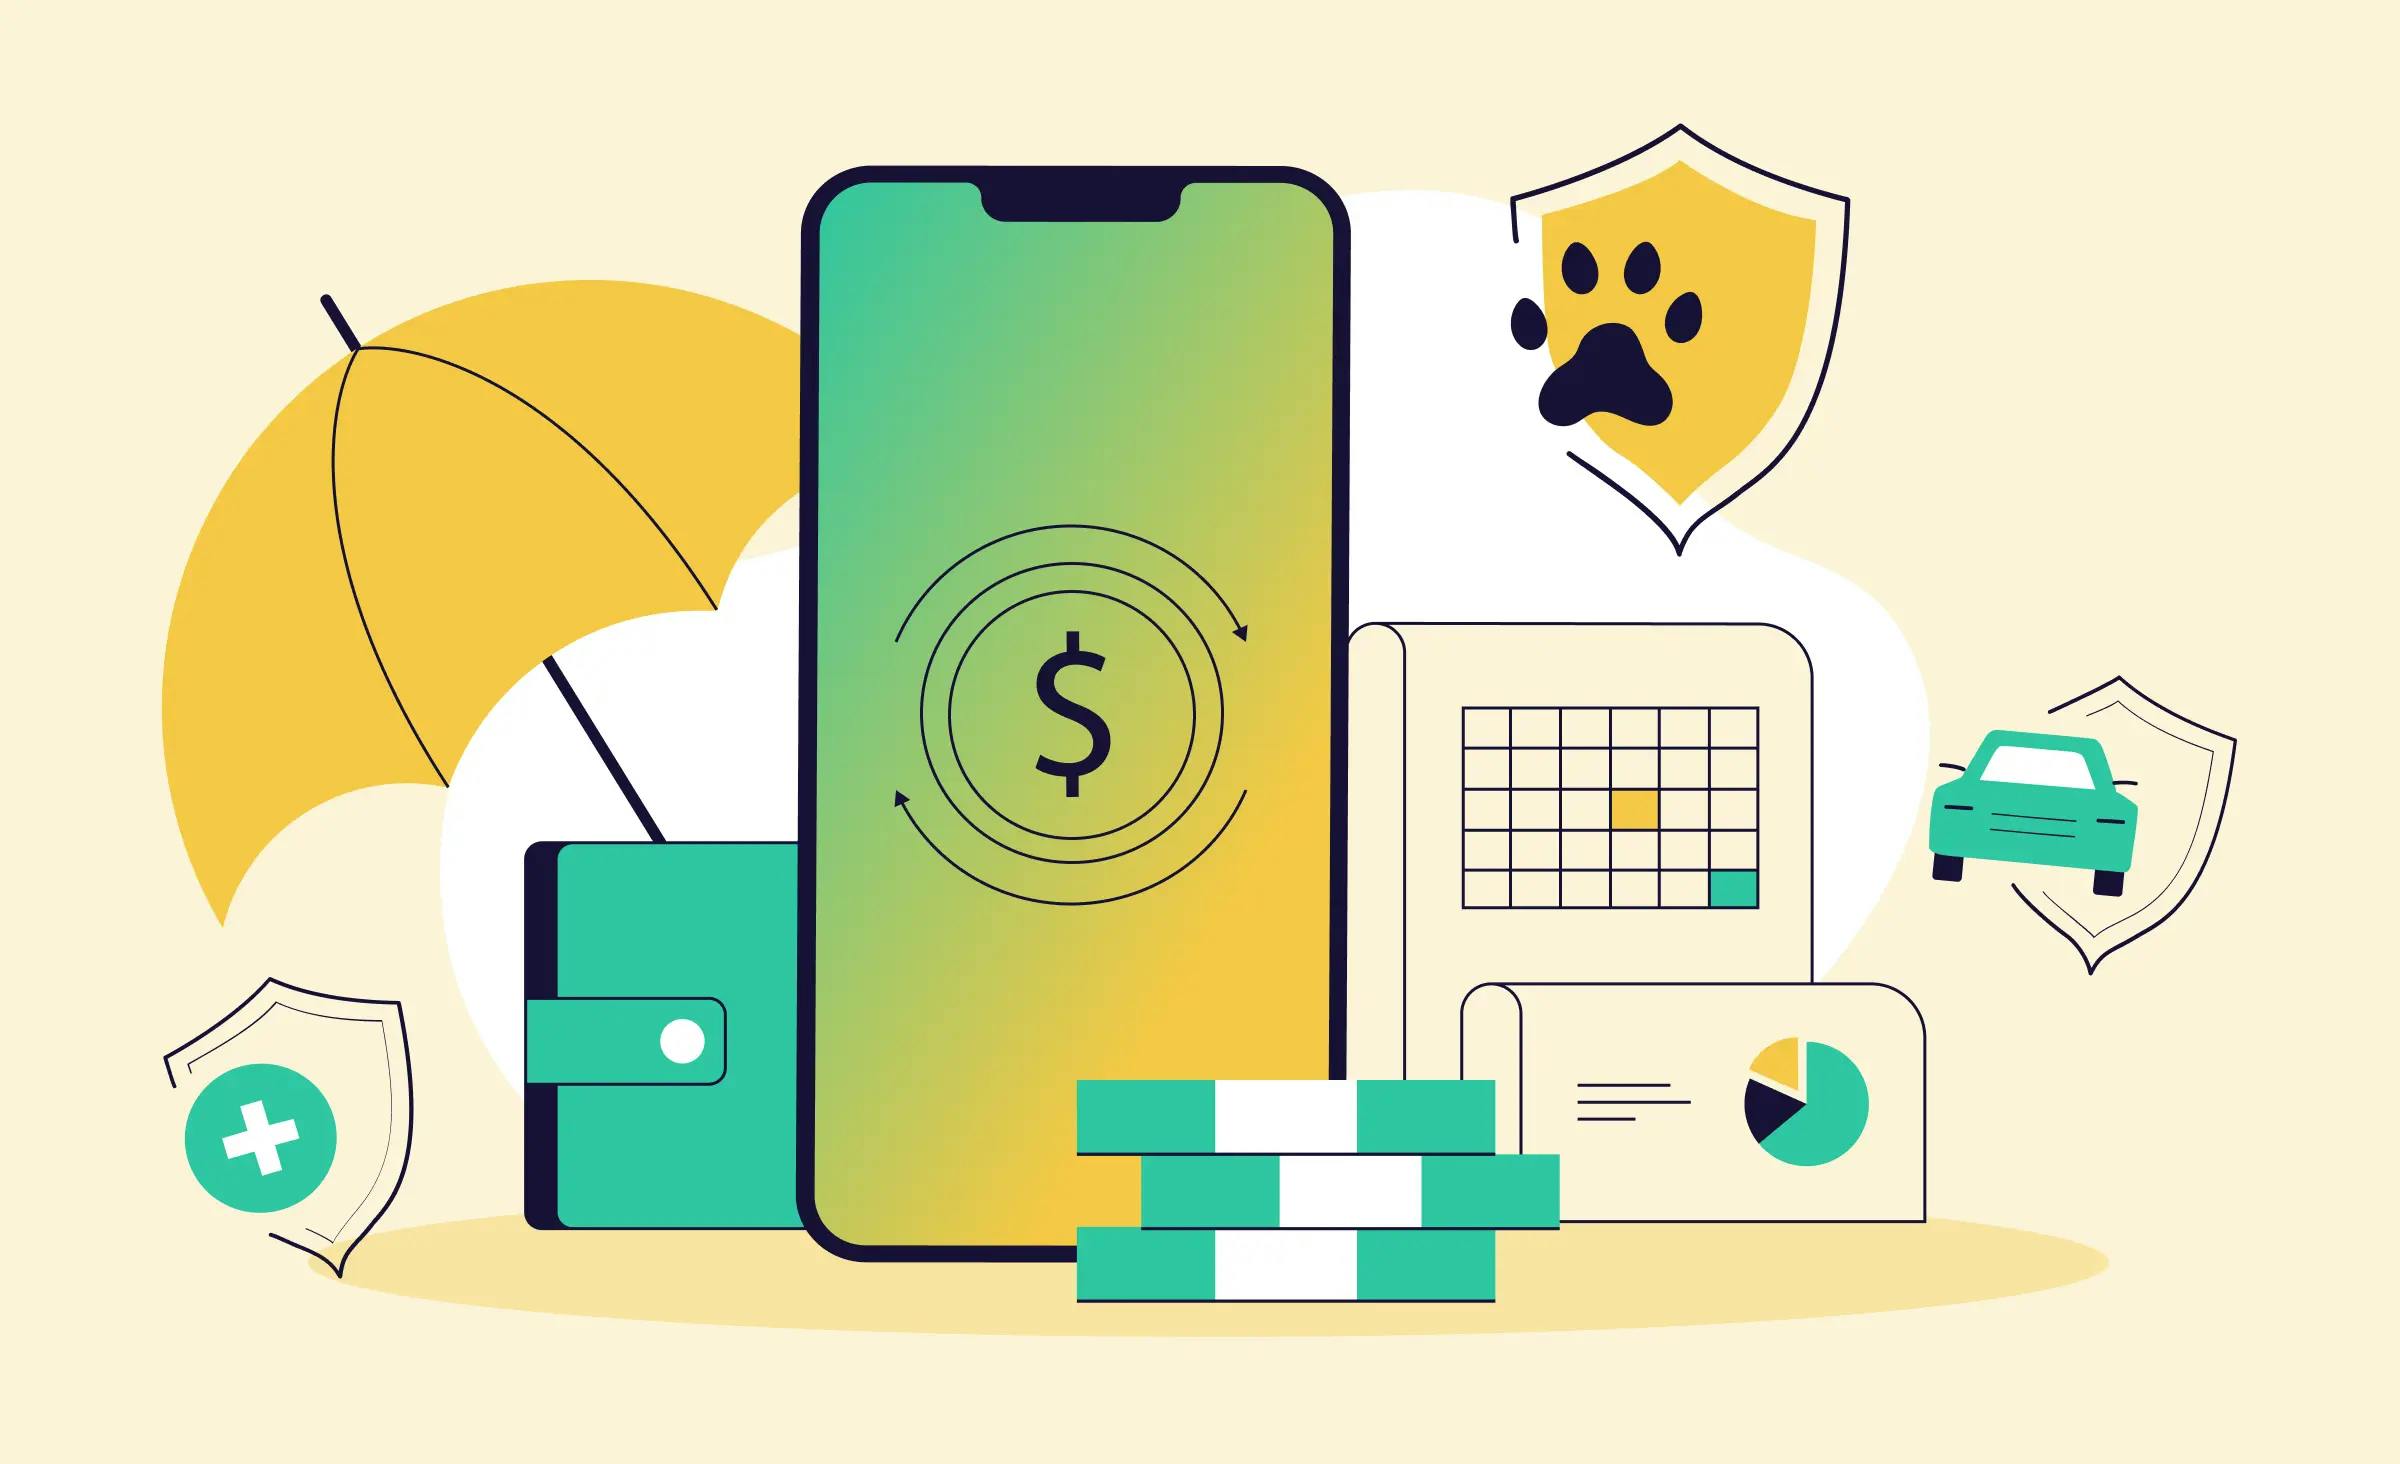 An article cover illustrates that the text is dedicated to insurance mobile app development and discusses different types of policies. We see a wallet, piles of money, statistics, a car, an umbrella, a calendar, and a paw symbolizing different insurances.